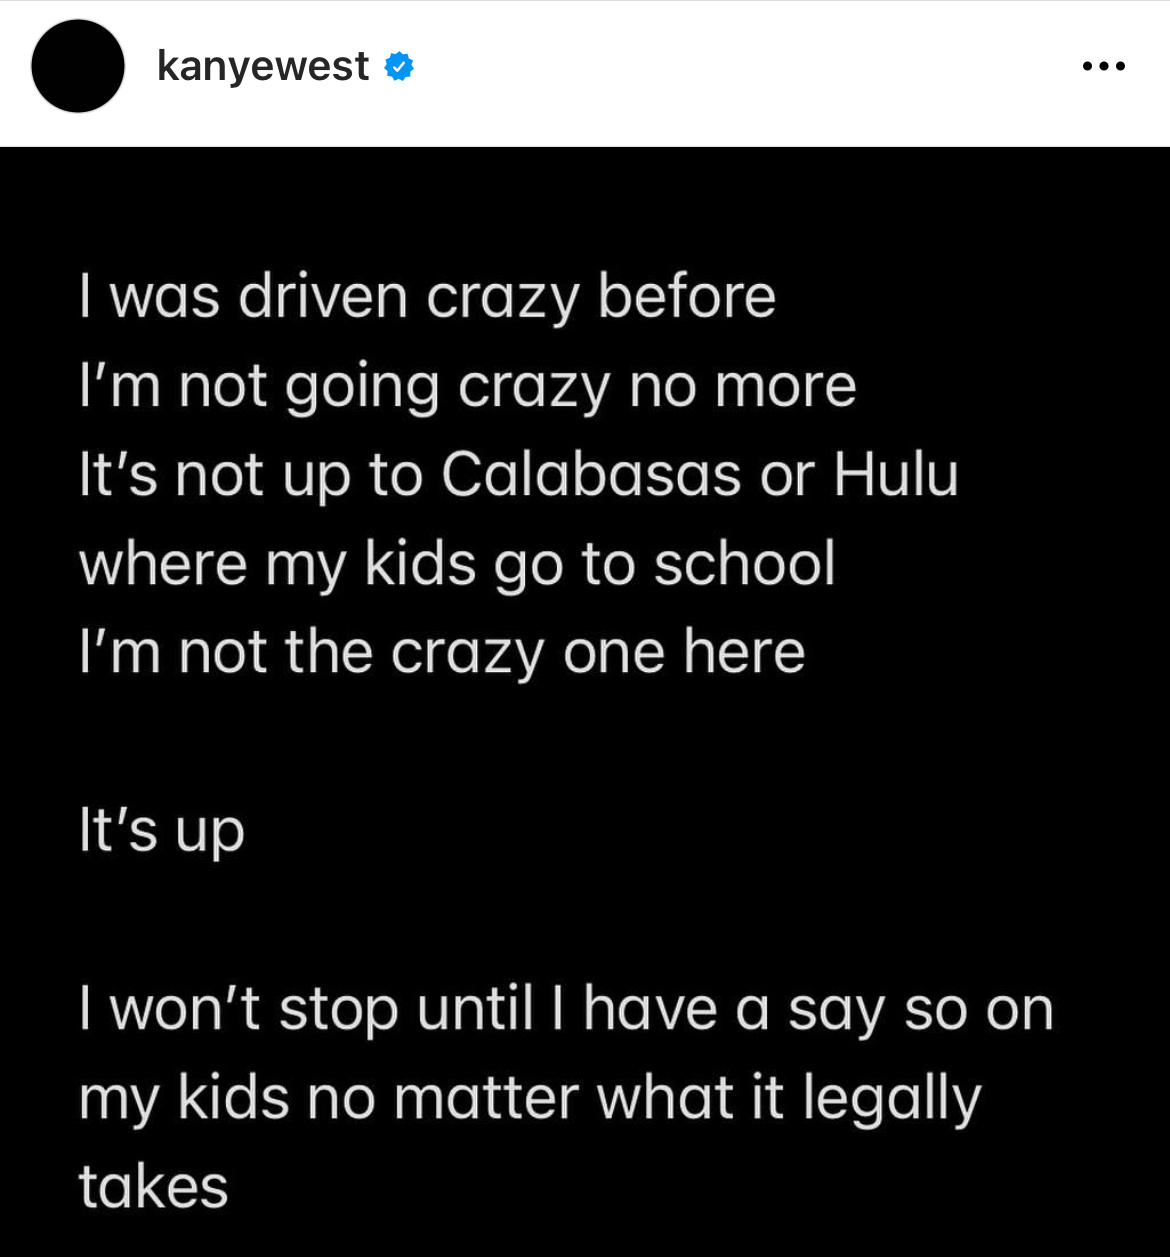 Kanye West Instagram Meltdown - screenshot - kanyewest I was driven crazy before I'm not going crazy no more It's not up to Calabasas or Hulu where my kids go to school I'm not the crazy one here It's up I won't stop until I have a say so on my kids no ma